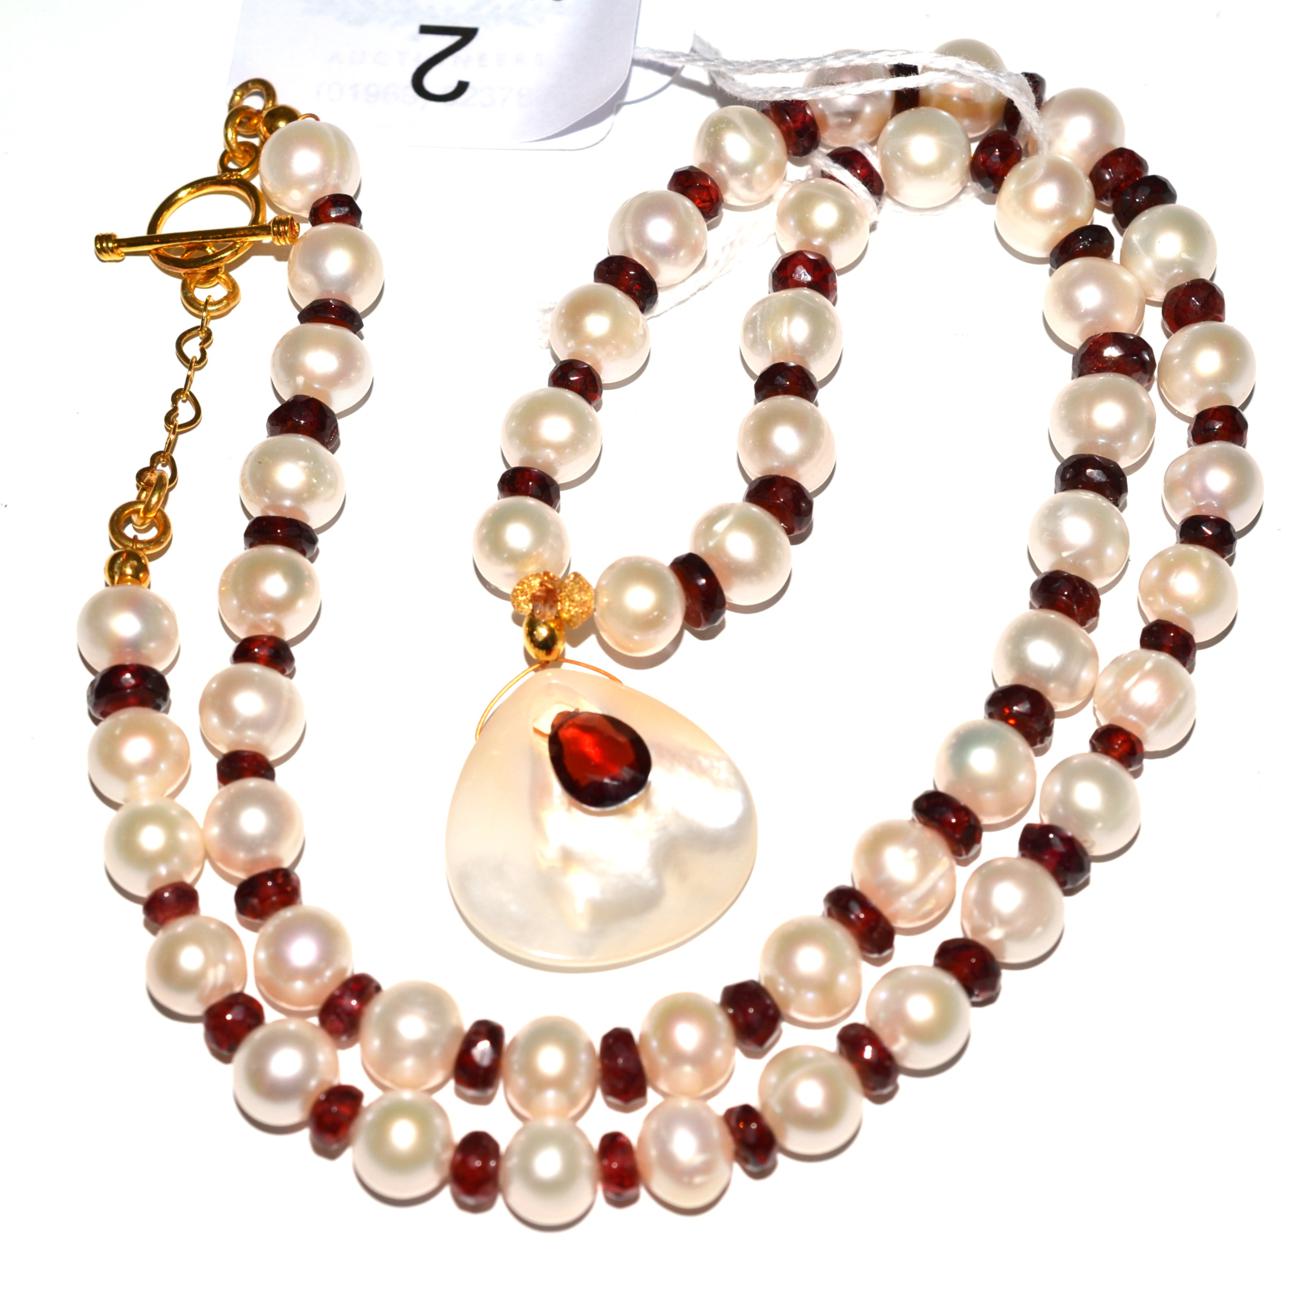 A garnet and cultured pearl necklace with pendant drop, the cultured pearls spaced with faceted